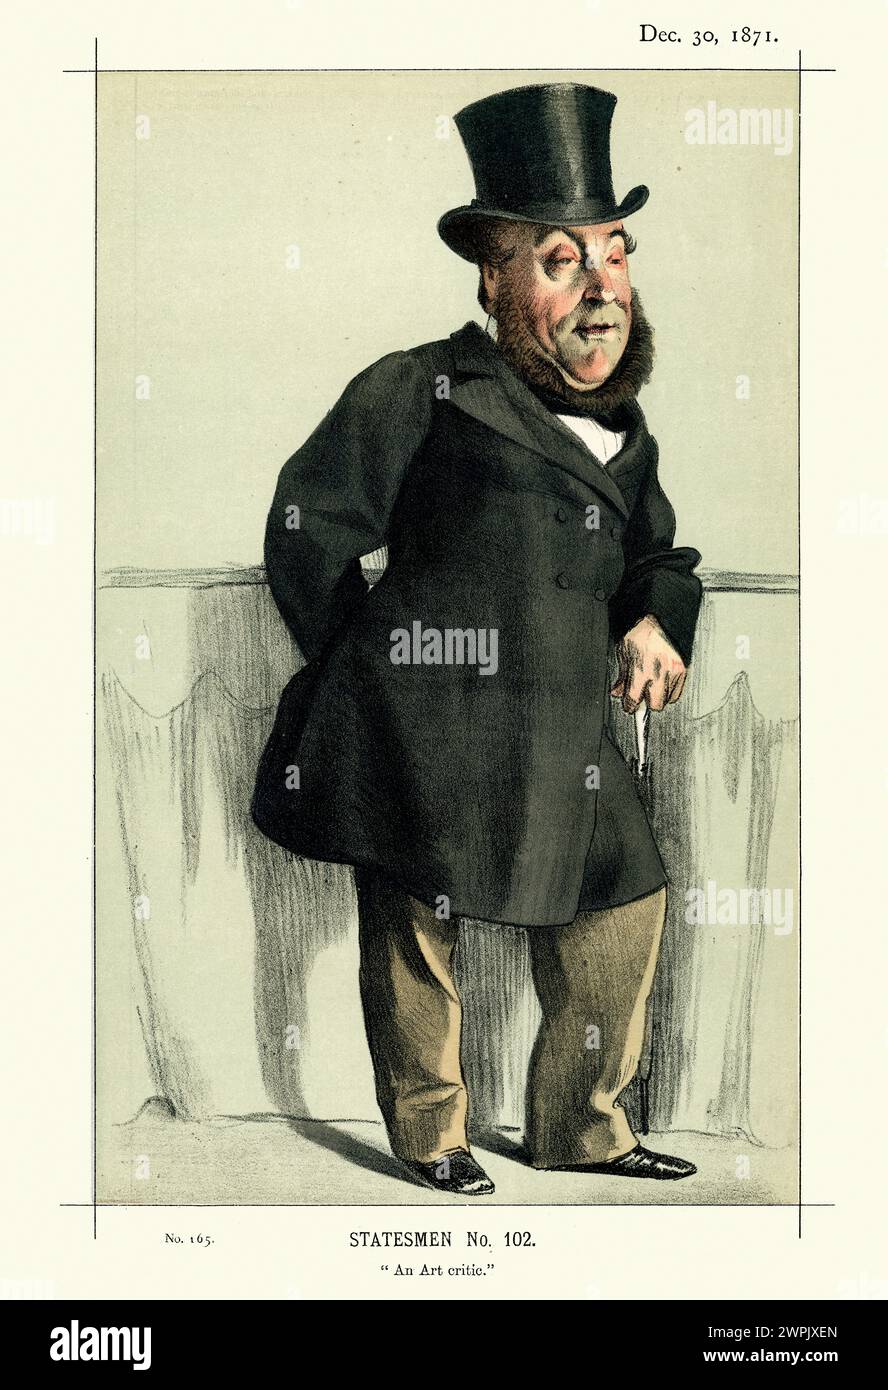 Victorian caricature of William Henry Gregory, an Anglo-Irish writer and politician. By James Tissot. Vanity Fair 1871 Stock Photo